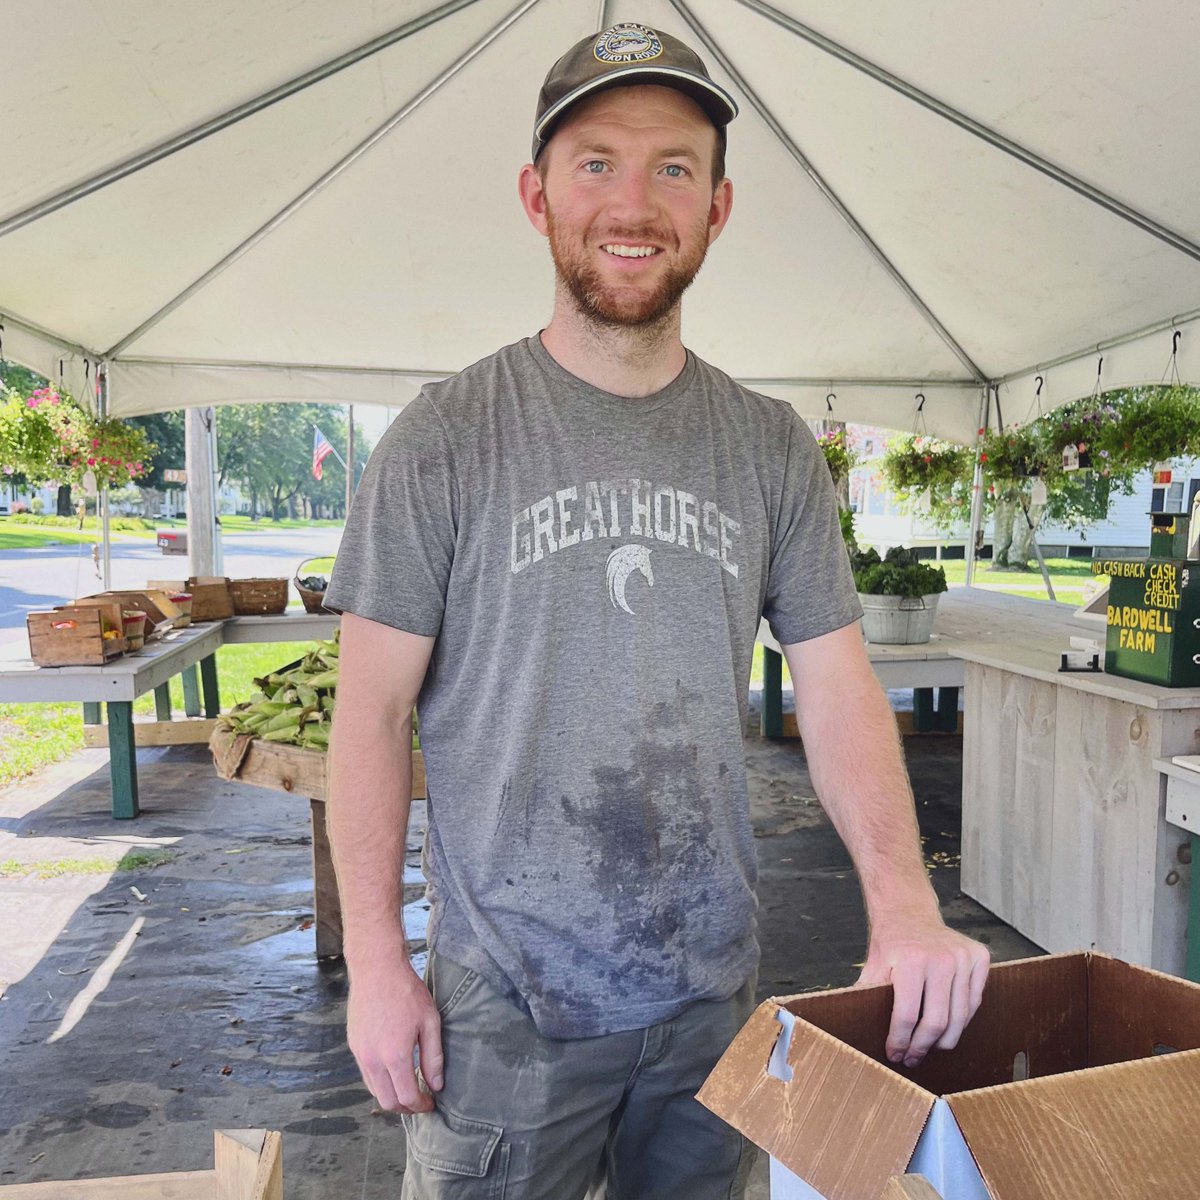 Everyone meet Sean, he's everywhere we need him to be, a hard worker, and has been our best-kept secret of the season! #amazingworkethic #thankyou #BardwellFarm #season2023 #agriculture #aglife #farmlife